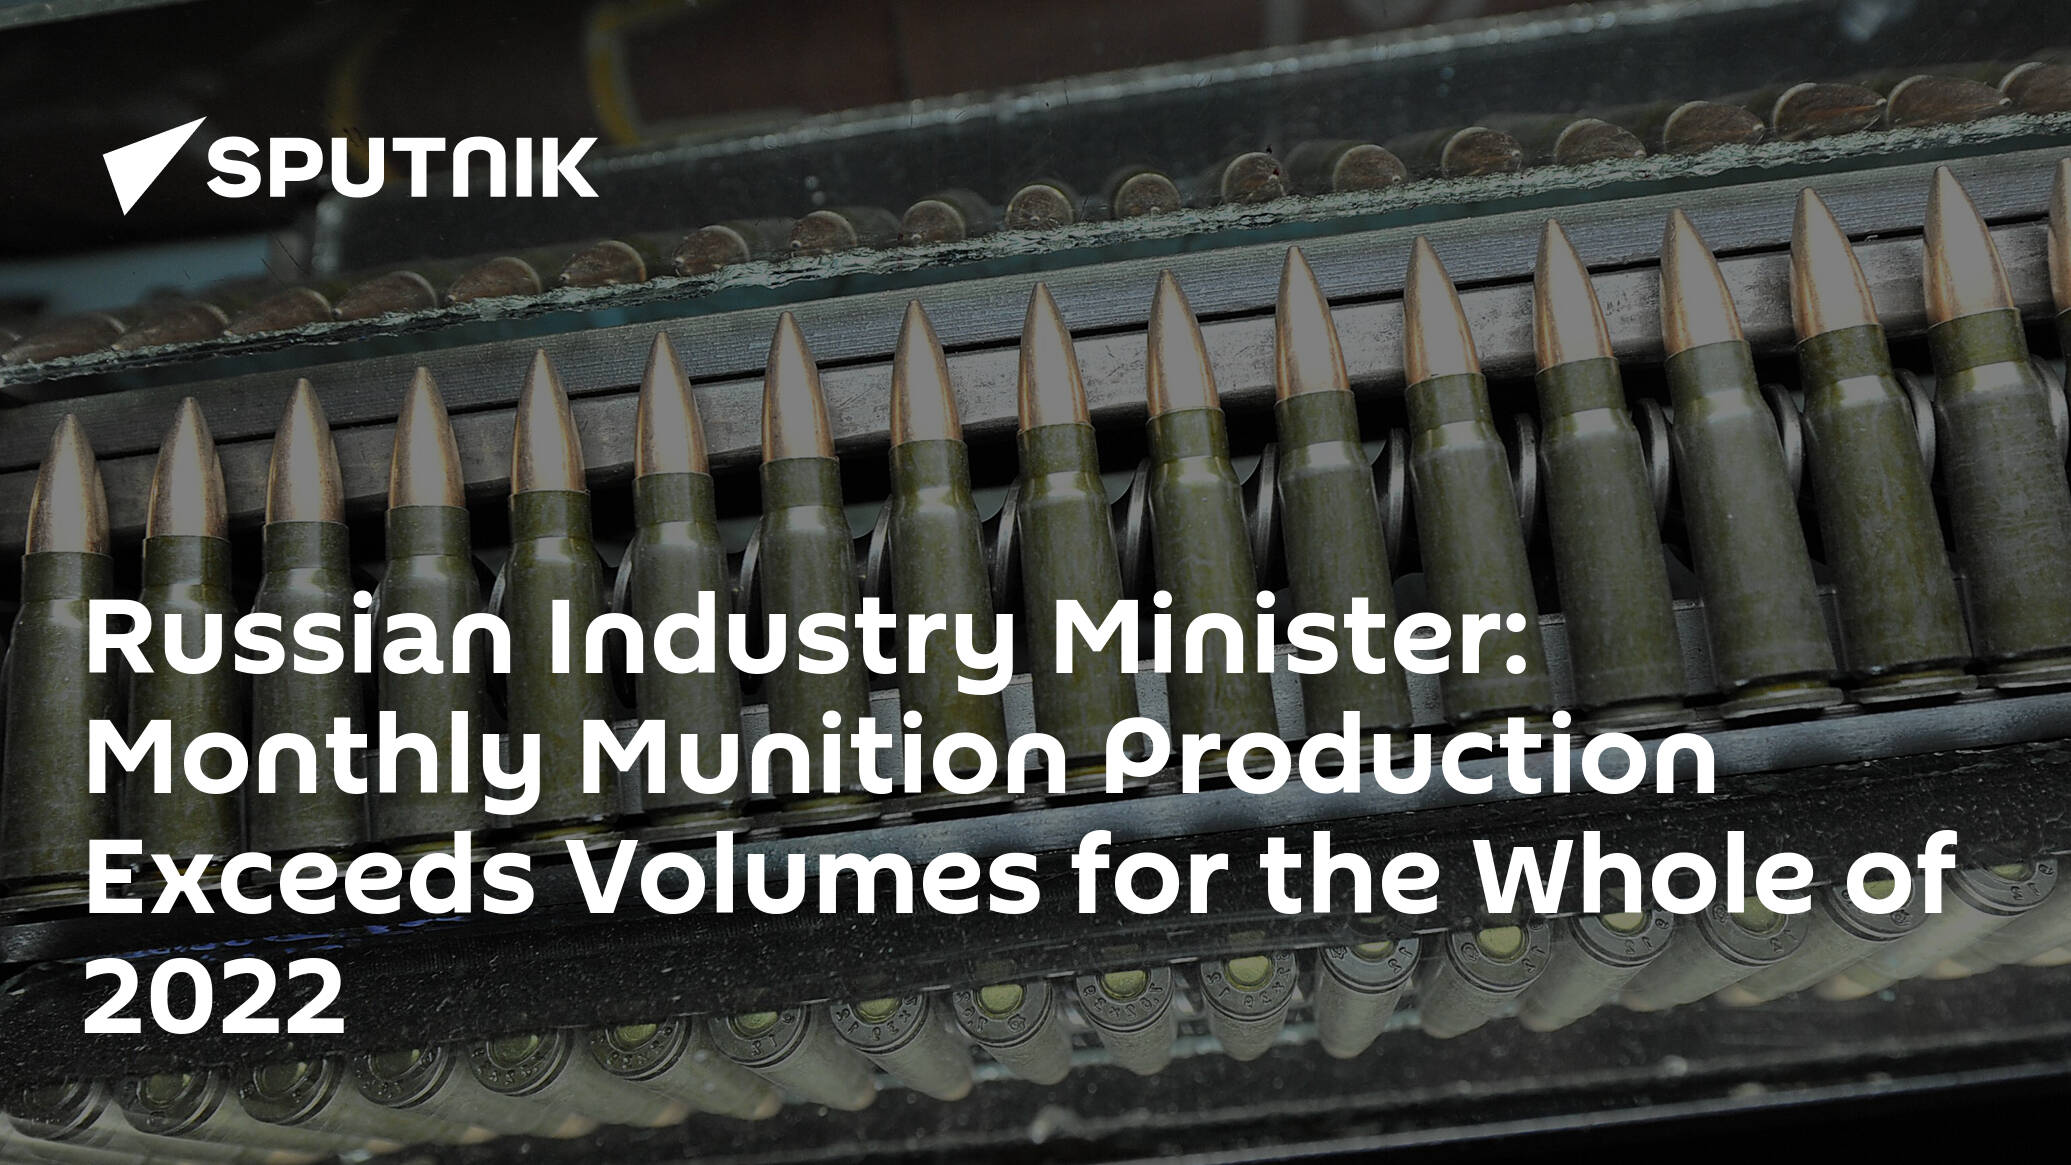 Russian Industry Minister: Monthly Munition Production Exceeds Volumes for the Whole of 2022